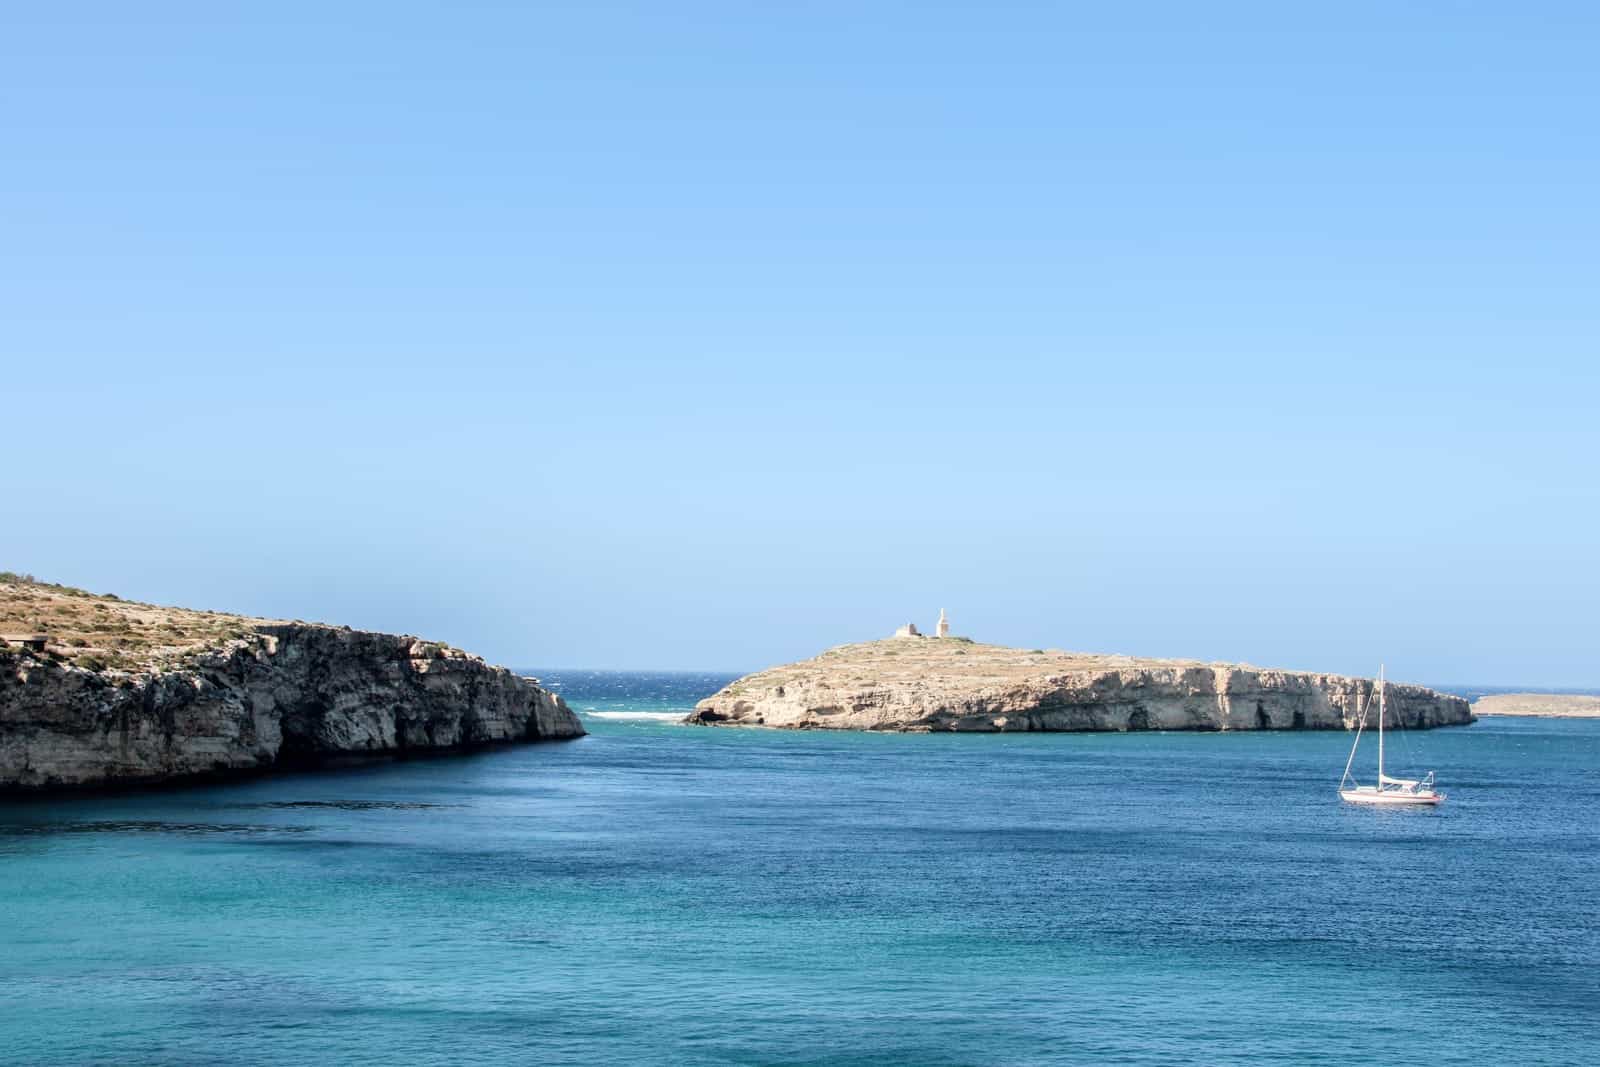 Panoramic view from Mistra bay in Malta looking out to St. Paul's Island